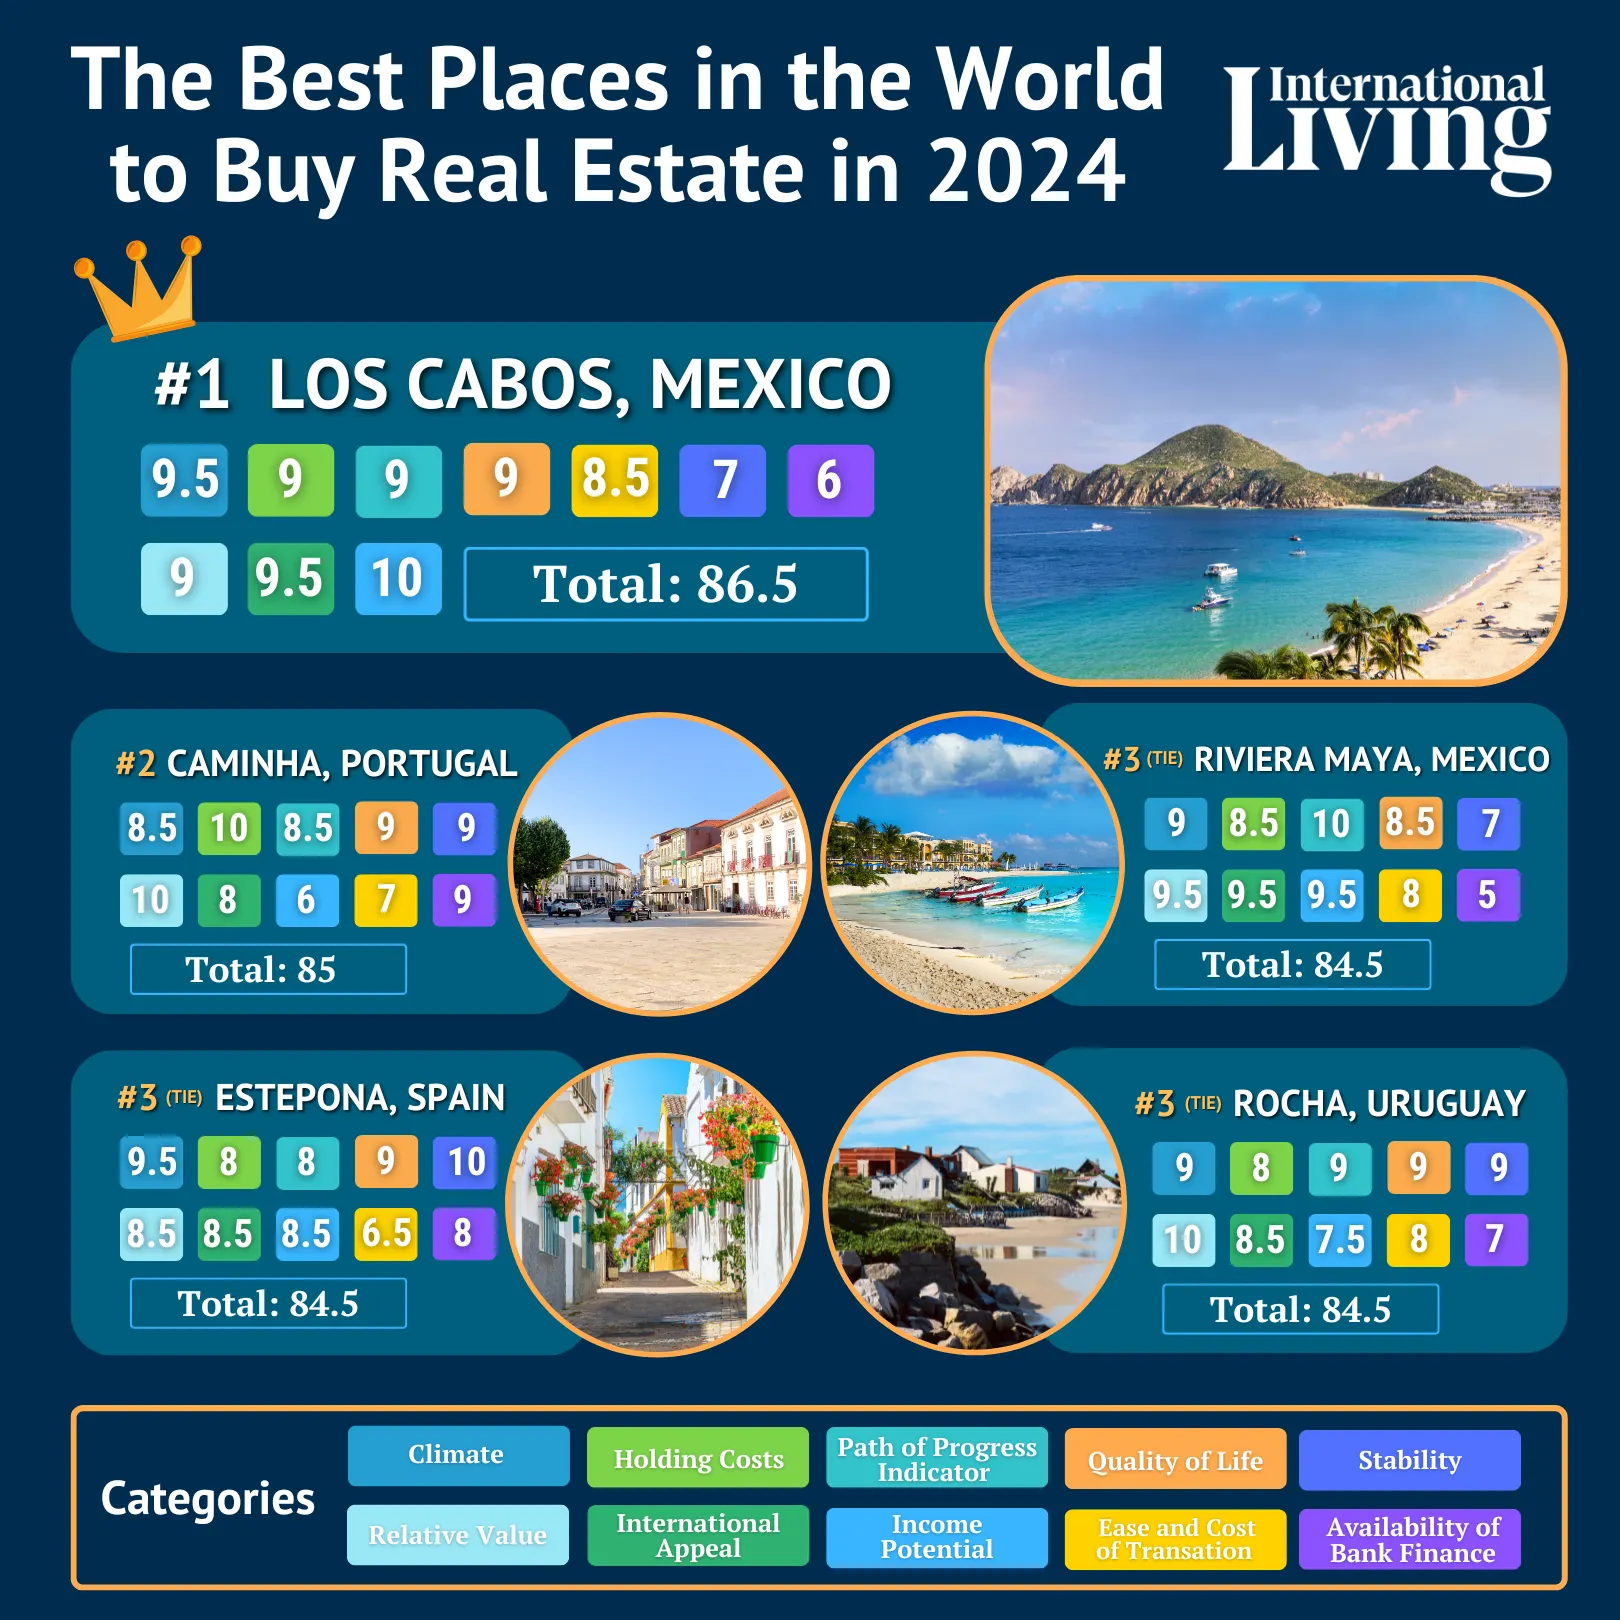 Best Places in the World to Buy Real Estate in 2024